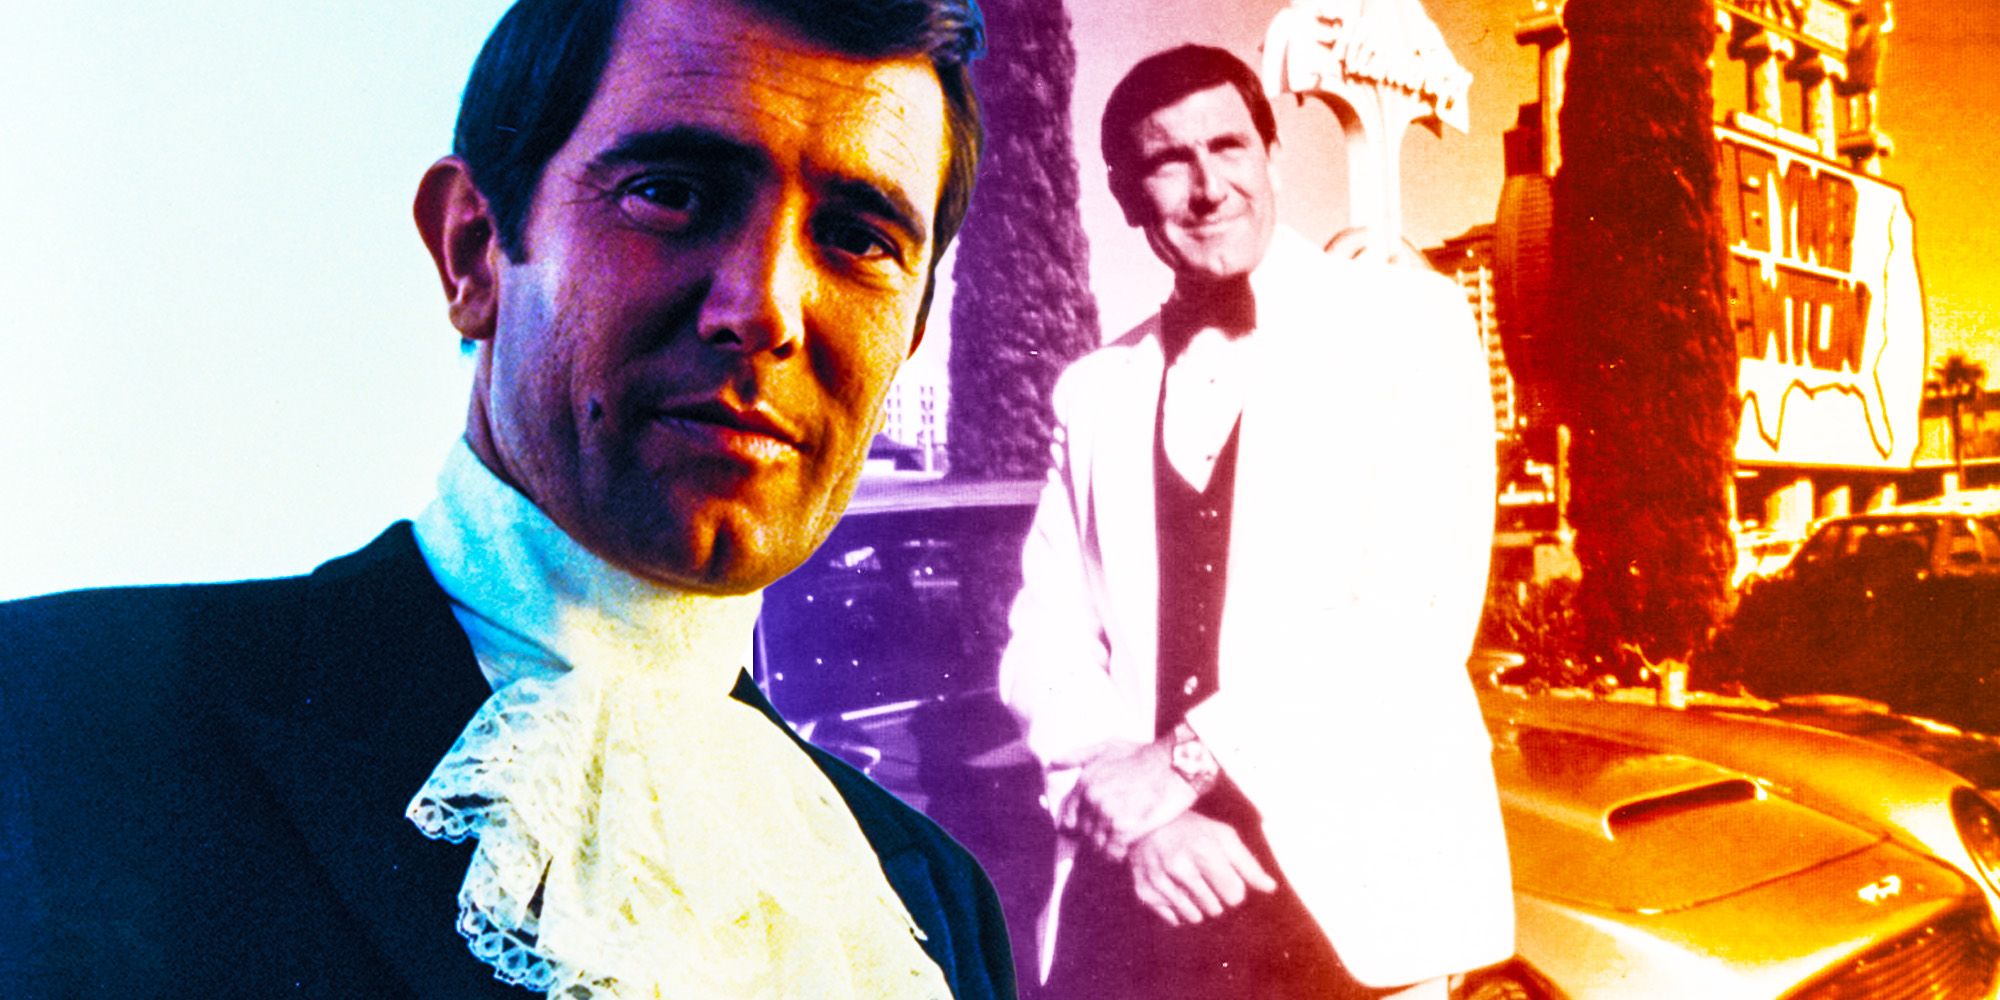 Return of the man from uncle george lazenby second james bond movie